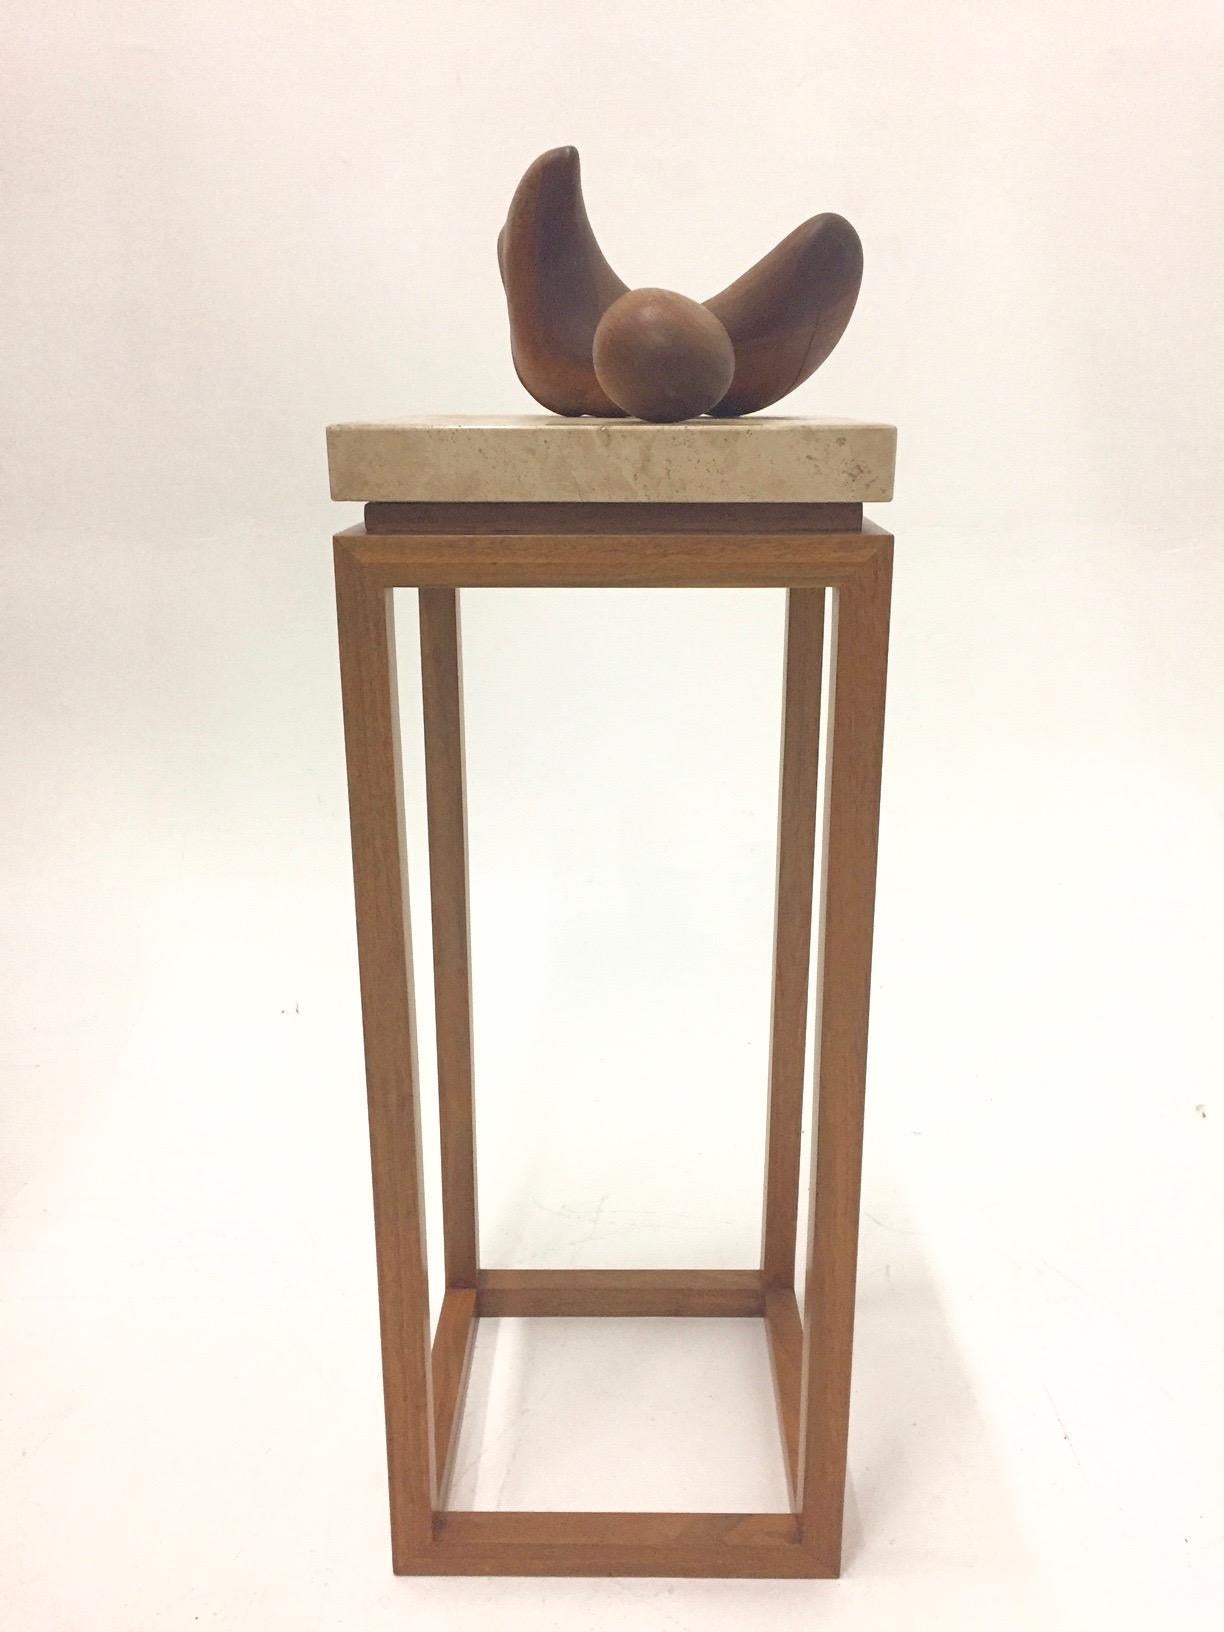 A sophisticated freestanding sculpture signed by the renowned artist Arthur Williams, having two smooth walnut shapes placed on a lovely slab of travertine, floating on a superb walnut pedestal with clean lines.